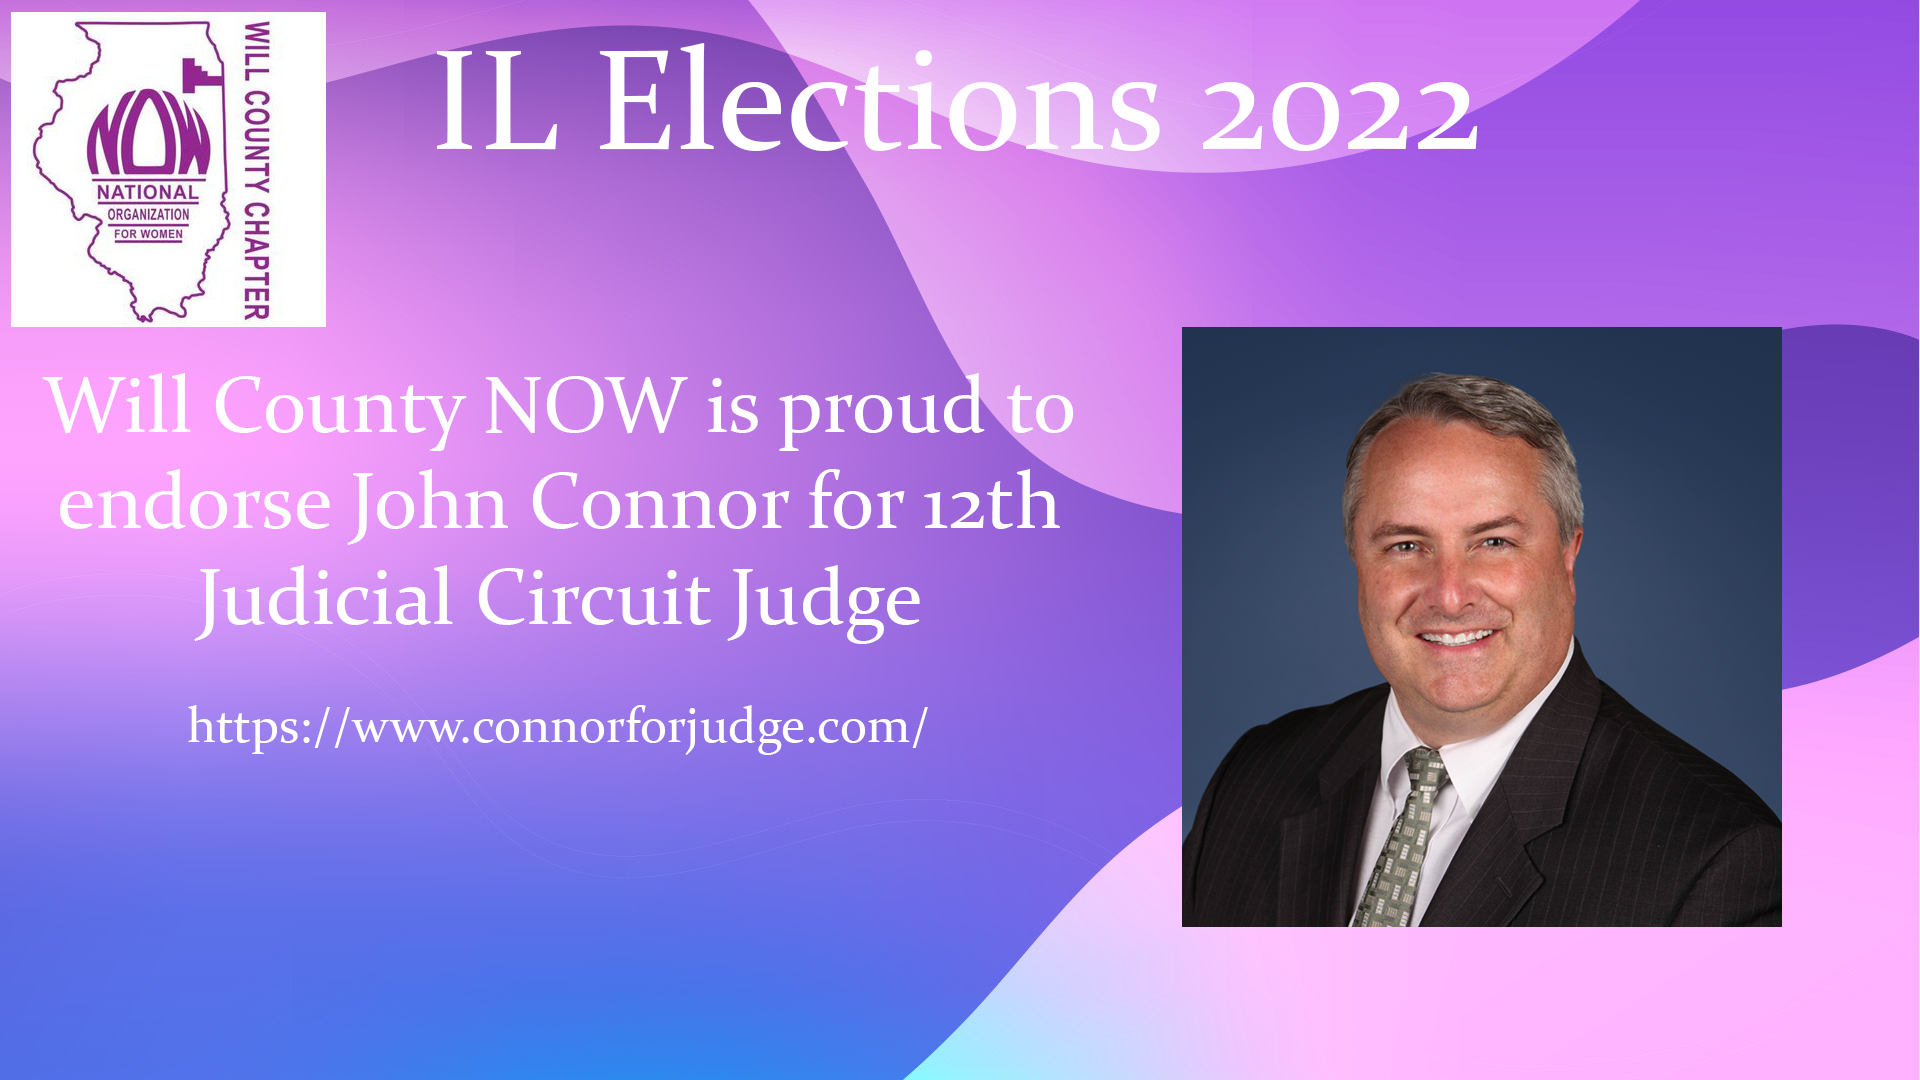 Will County NOW Endorses John Connor for 12th Judicial Circuit Judge